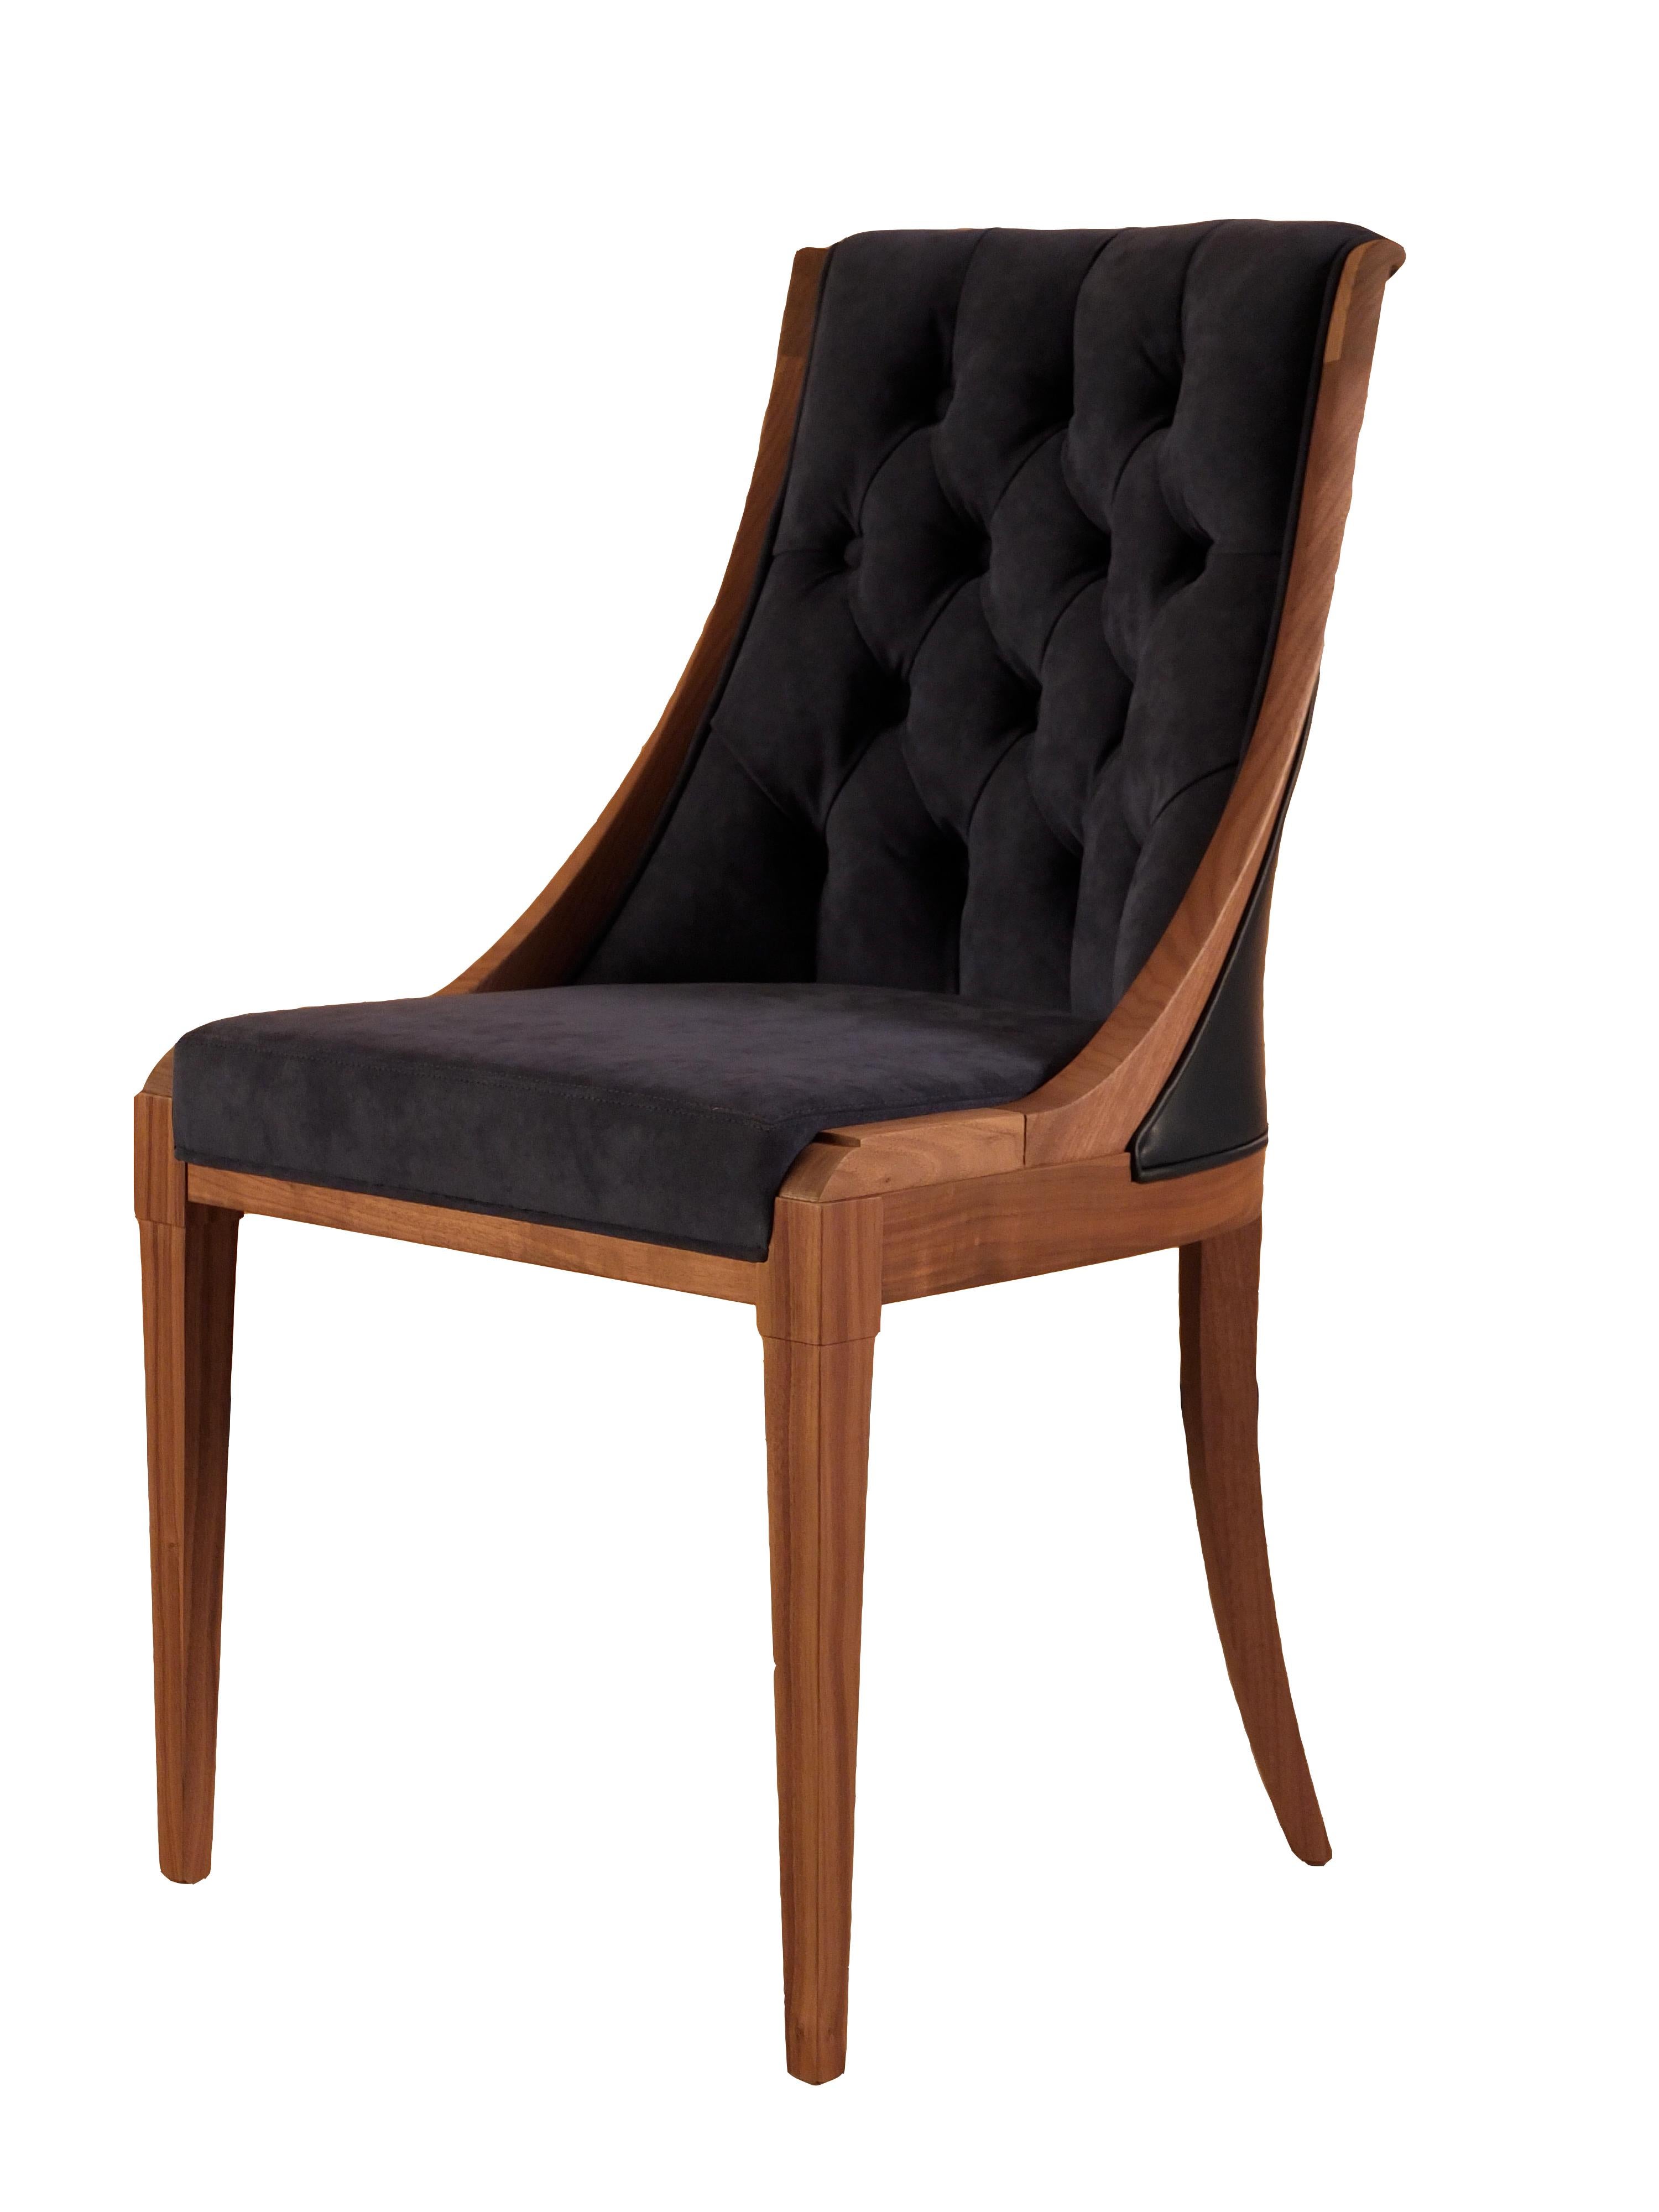 Musa is an elegant biedermeier style chair made of solid cherrywood
Finely upholstered with COM, fabric or leather
The wood frame can be made of different color finishes.
Hand made in Italy by Morelato
 